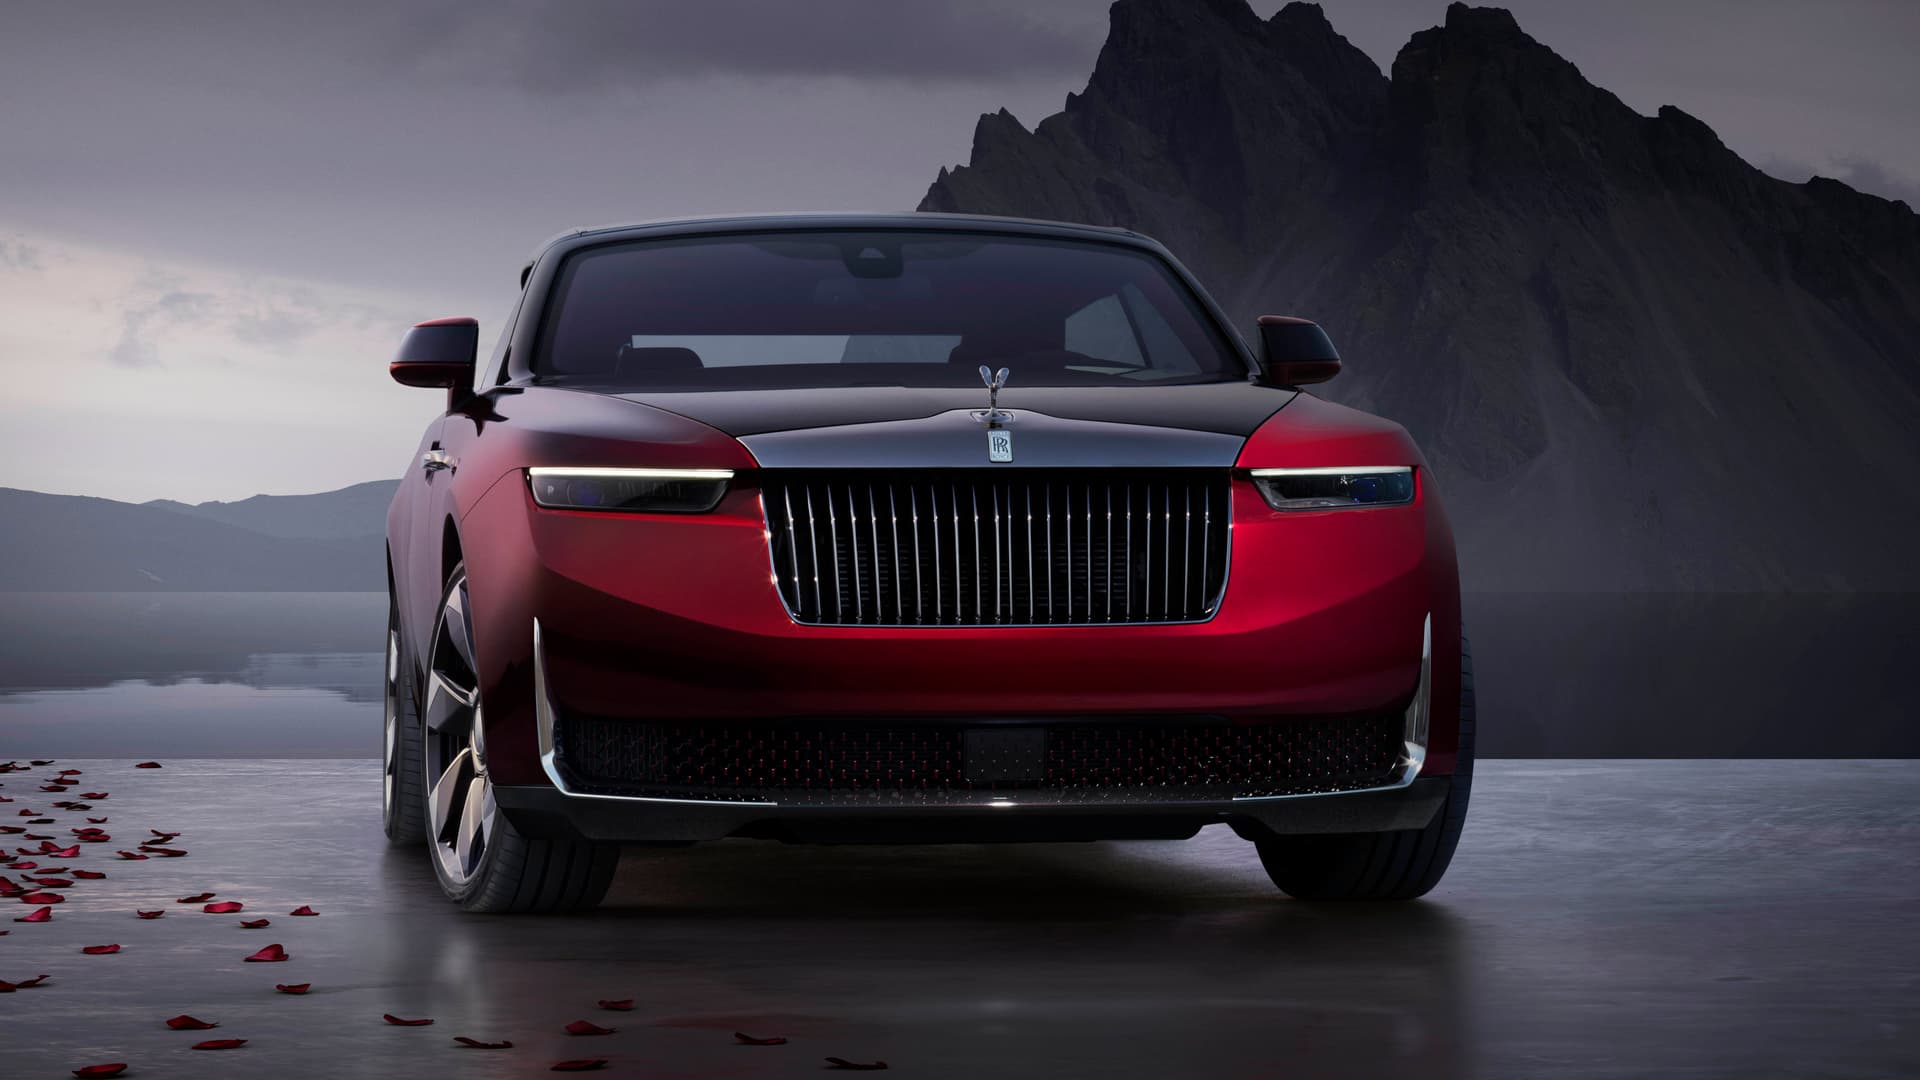 rolls-royce droptail, la rose noire, black badge, rolls-royce phantom, eurokars, rolls-royce, phantom, cullinan, ghost, dawn, wraith, spectre, a coachbuilt rolls-royce droptail with 600+hp... the la rose noire is the first of only four examples